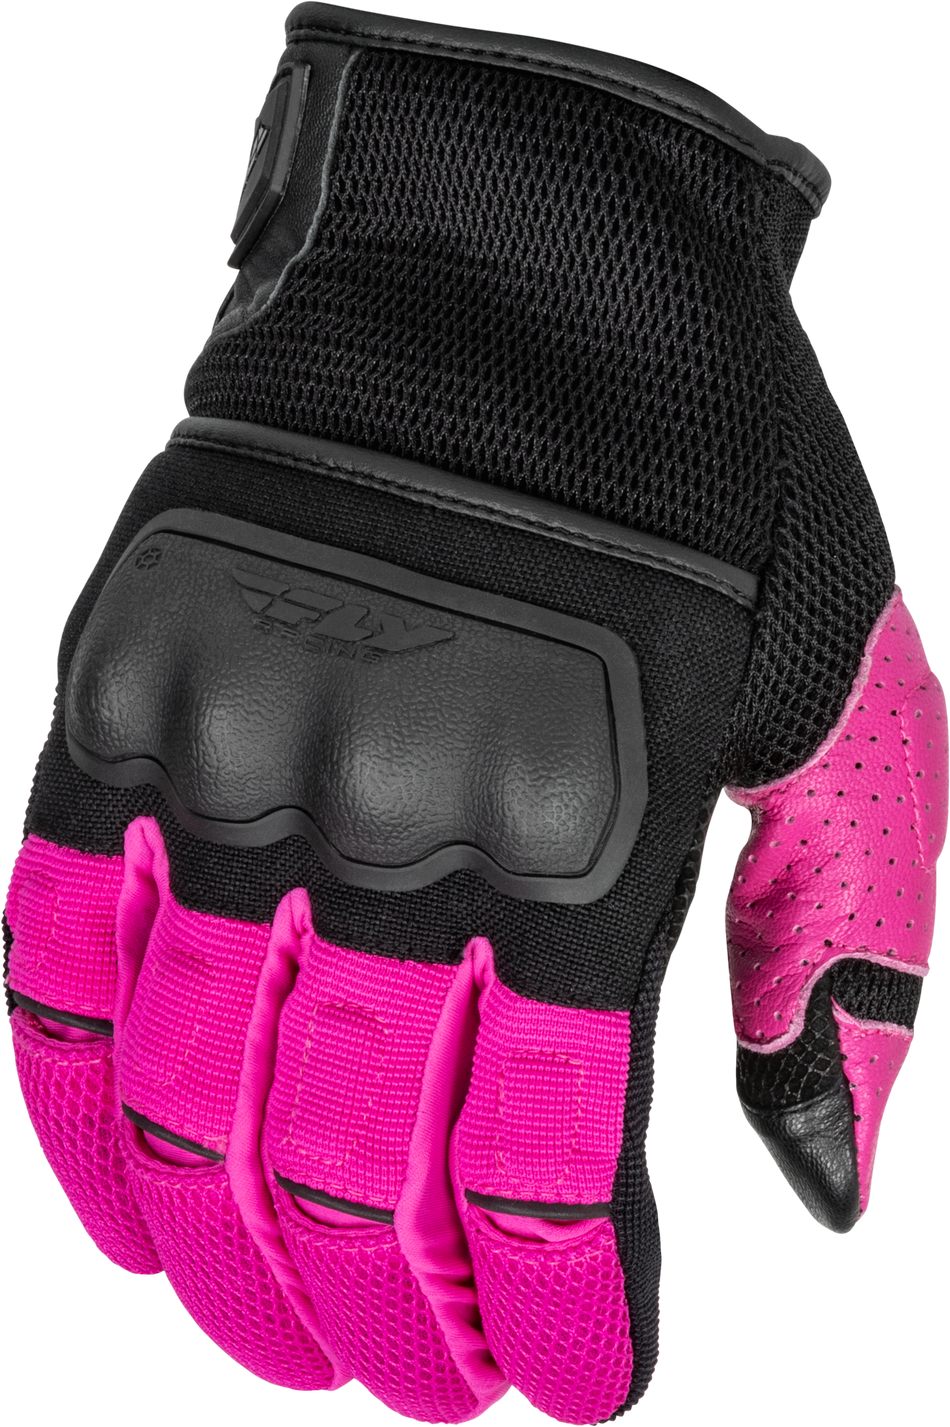 FLY RACING Women's Coolpro Force Gloves Black/Pink Lg 476-6302L